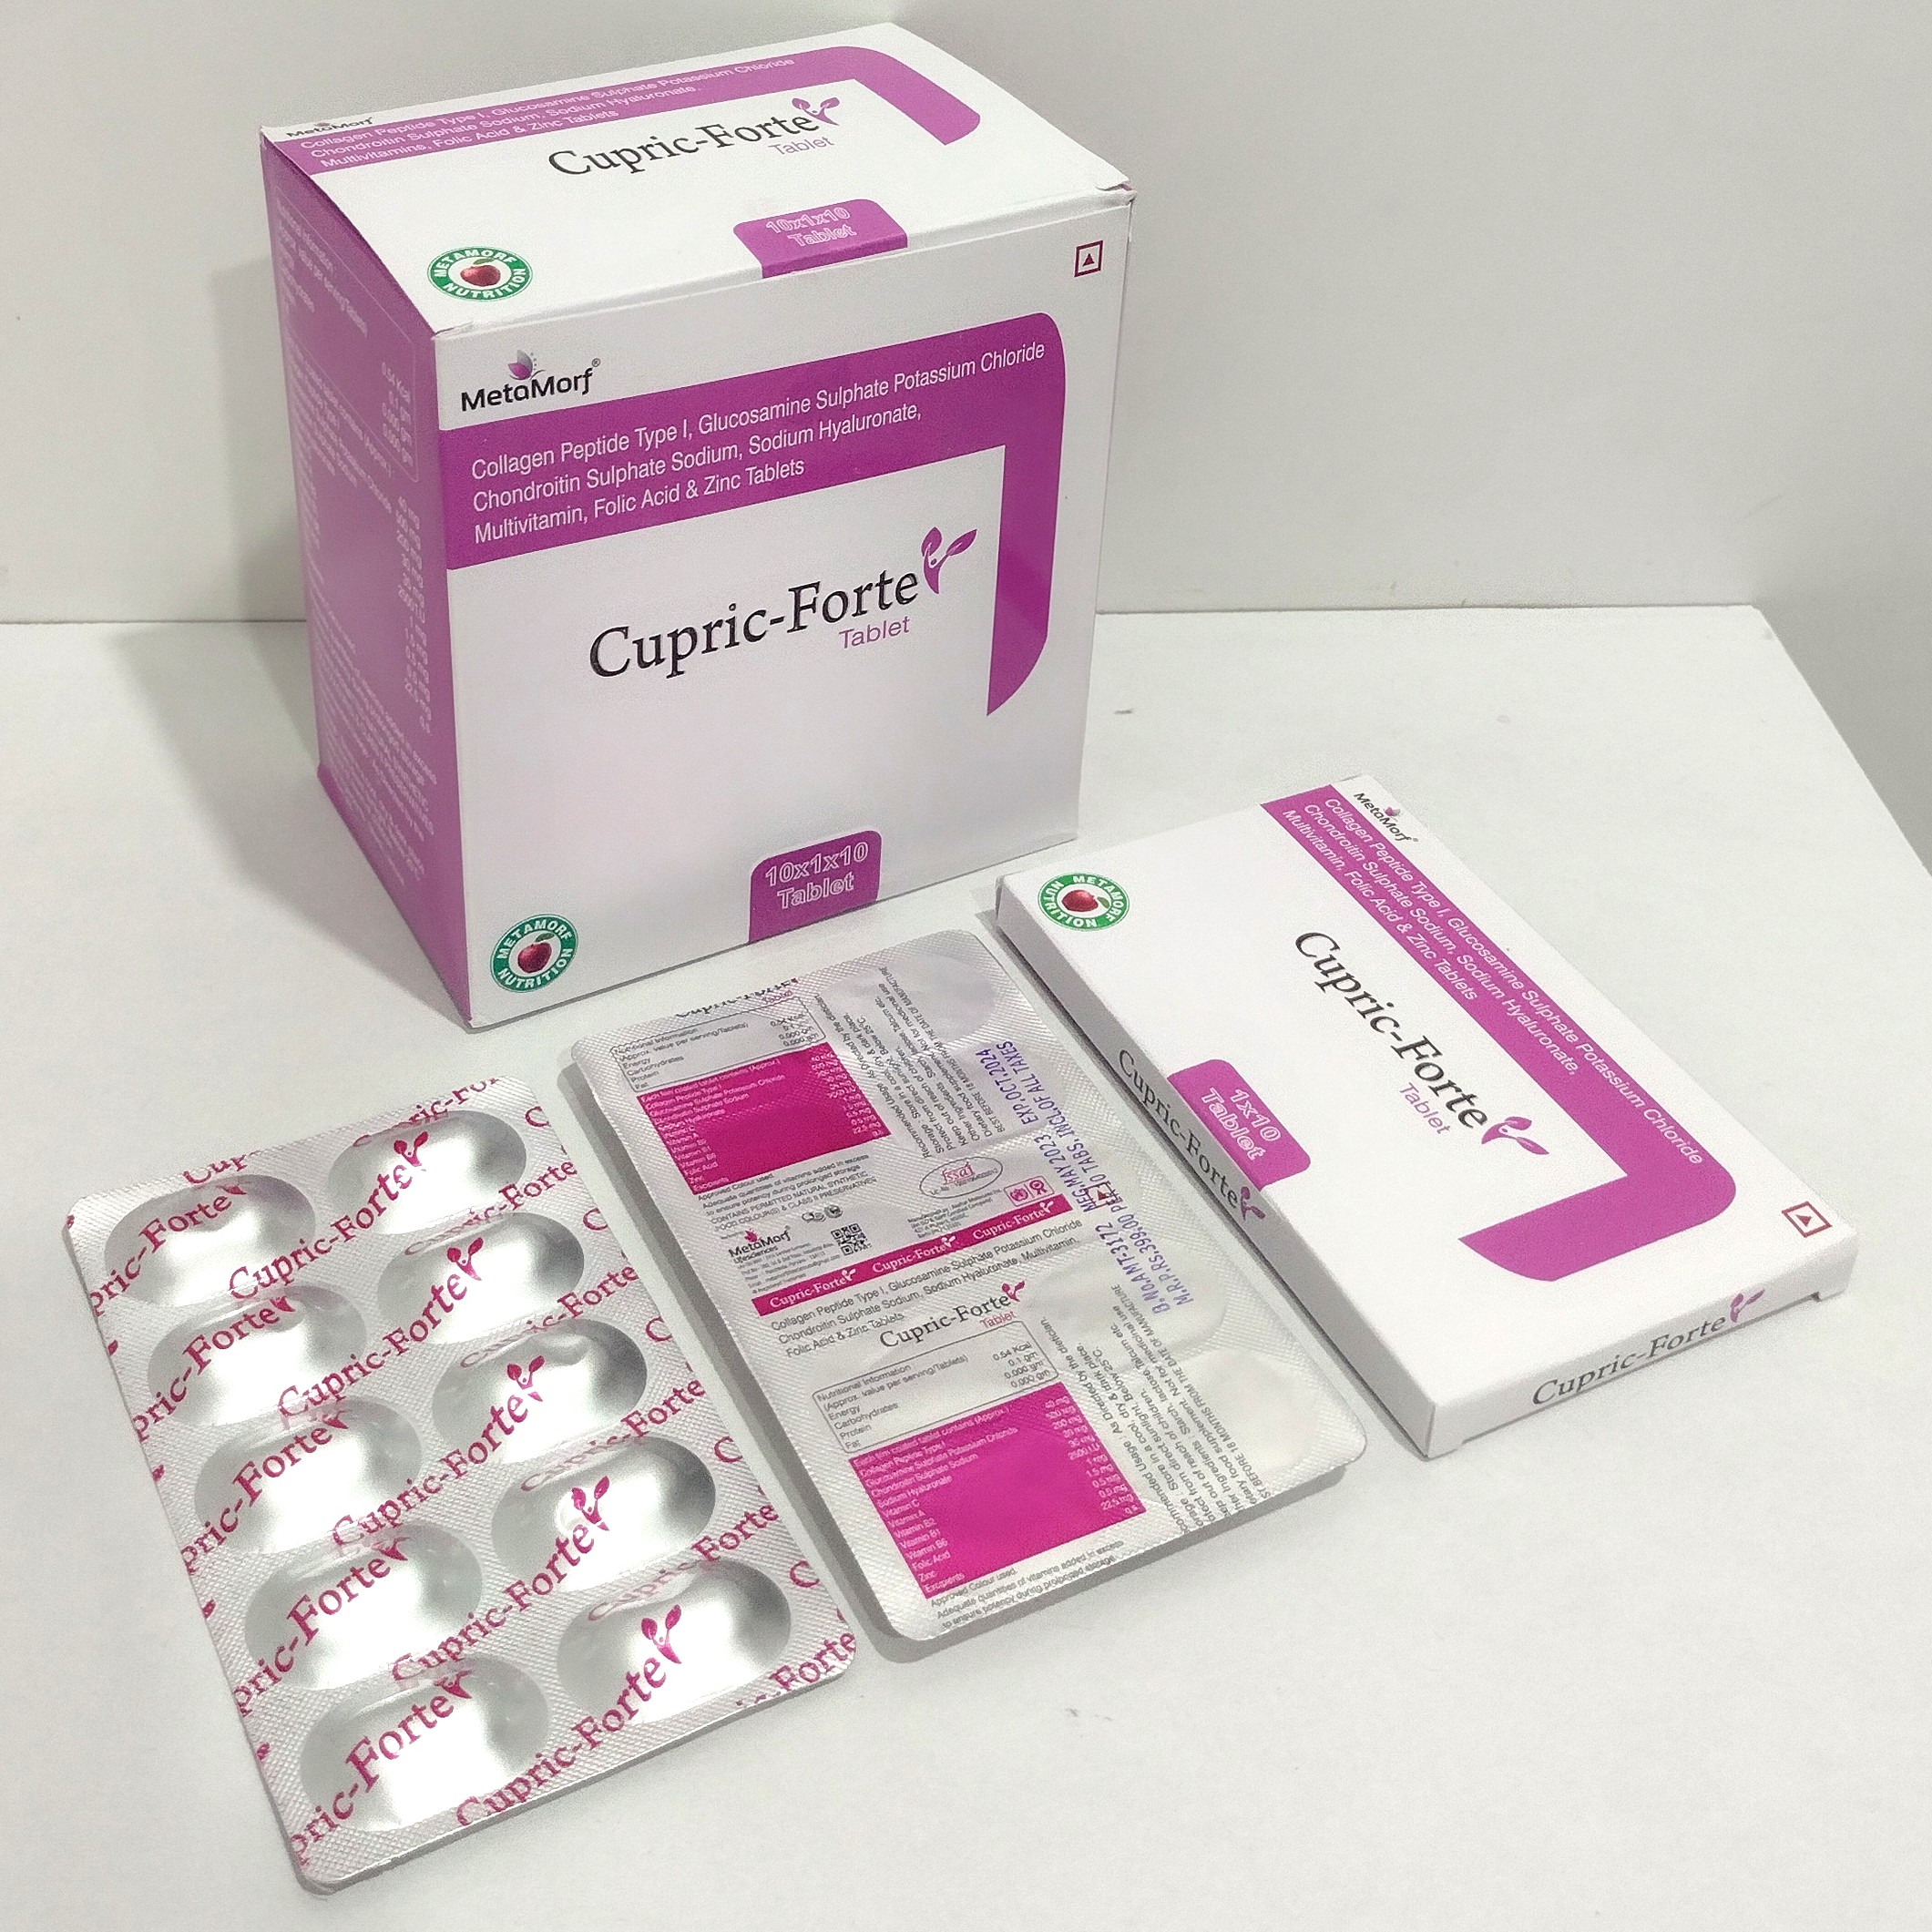 Cupric-Forte Tablets